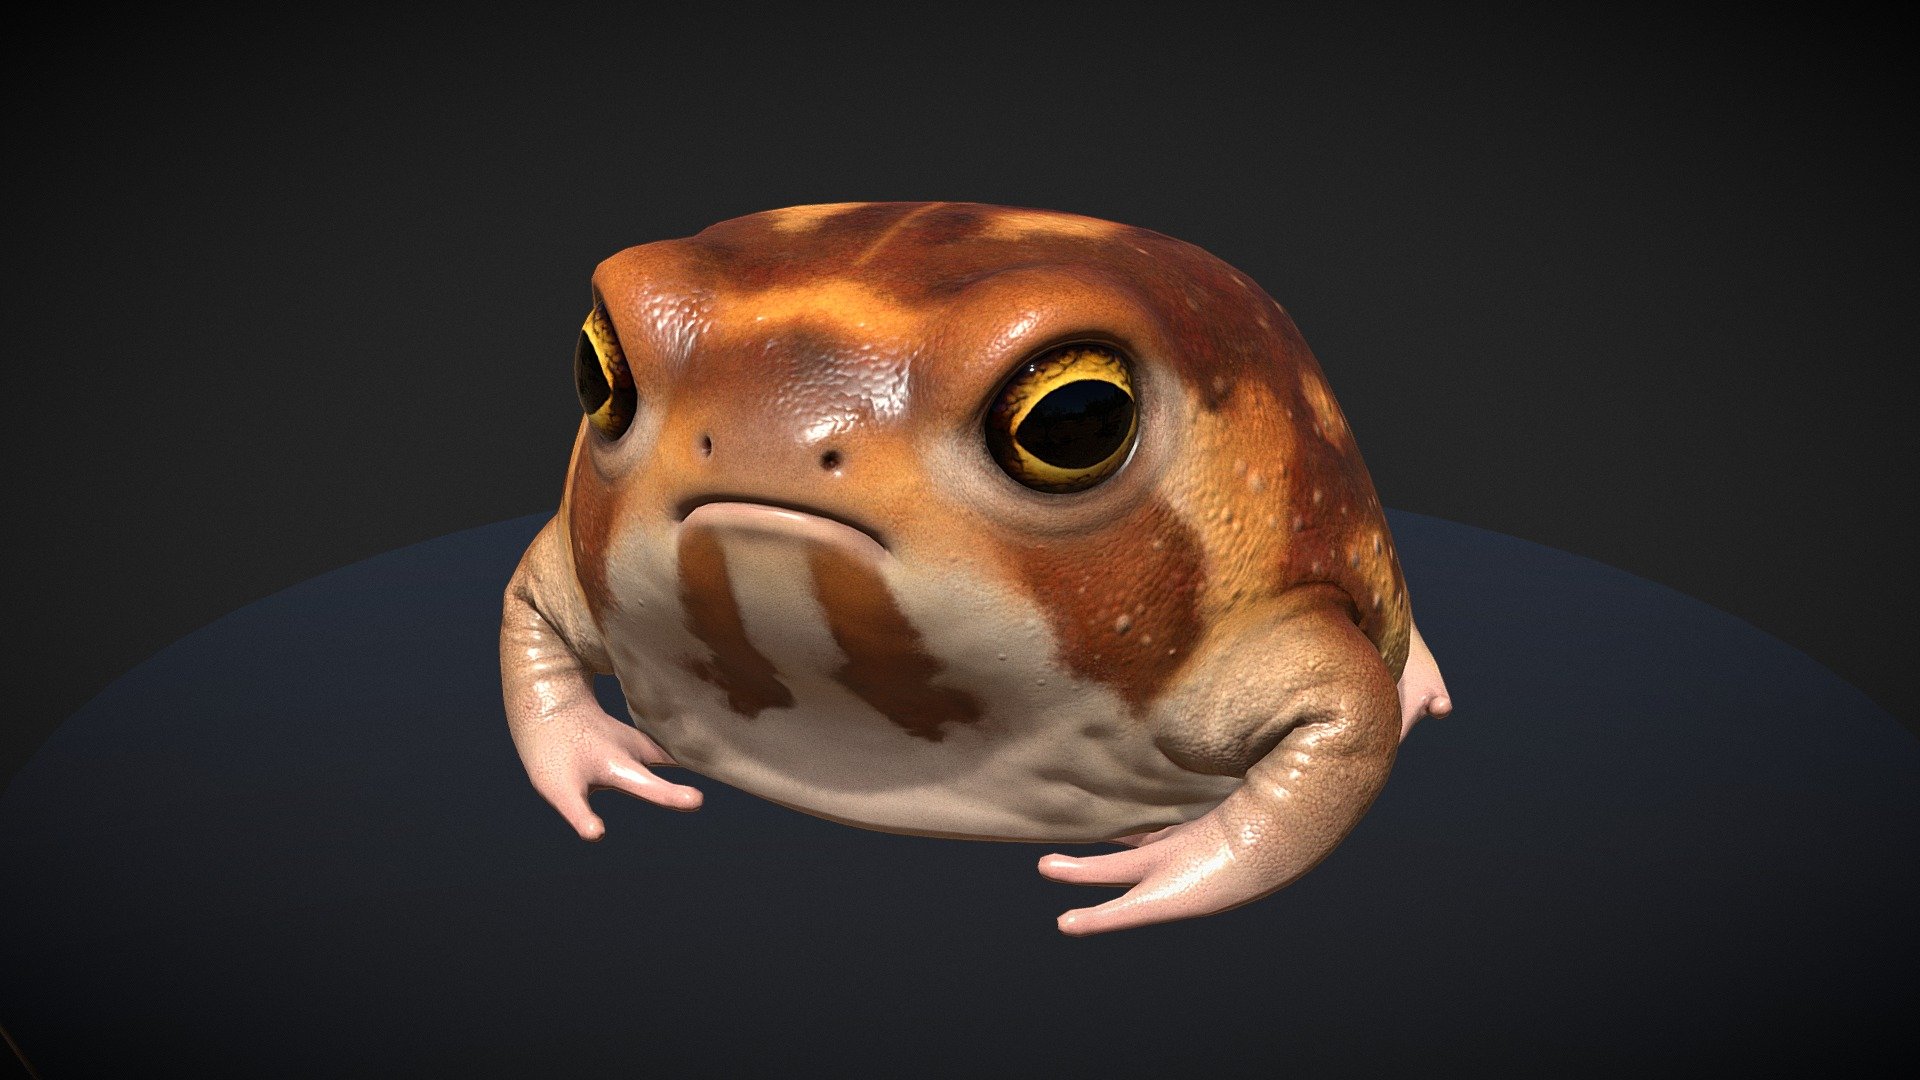 🐸 Desert Rain Frog 🐸

✧

Completed March 2023.

✧

Zbrush: High poly.

Maya: low poly, UVs.

Marmoset Toolbag: Bakes.

Sketchfab: Presentation.

✧

Additional renders and technical breakdown:

https://www.artstation.com/artwork/NGo5BP

✧

My social media: 

https://draconic-cowboy.carrd.co/

✧

This artwork is not for sale and is not available for download. Do not use my images for your own profit 3d model